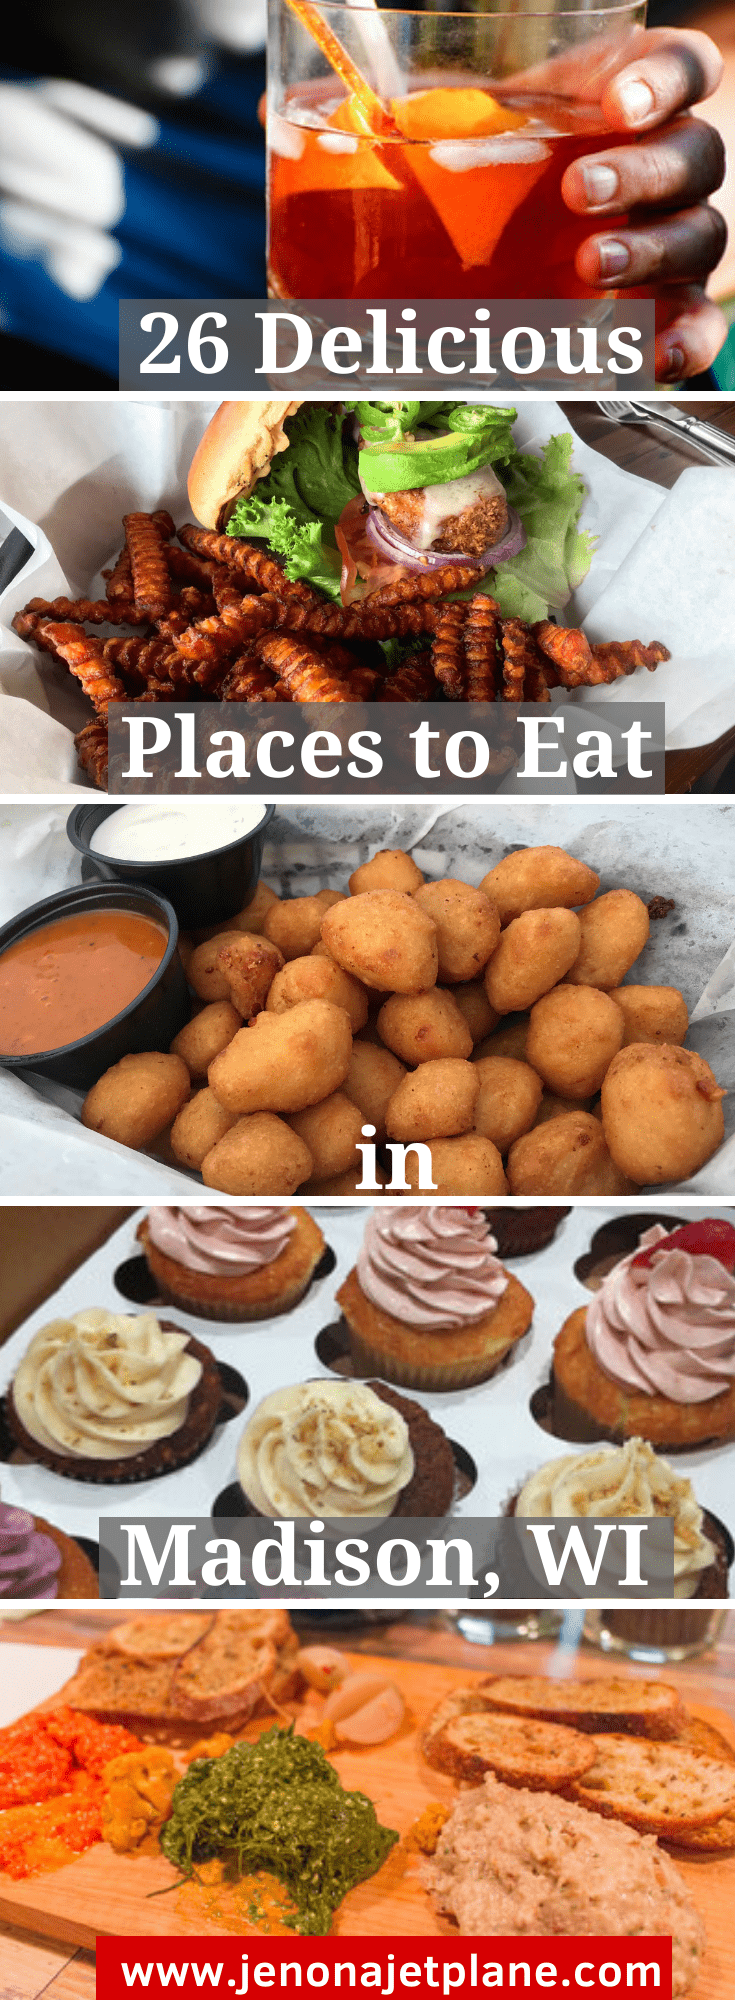 Looking for the best places to eat in Madison, Wisconsin? Whether you're going out for brunch or a fancy dinner, these tasty options will hit the spot!